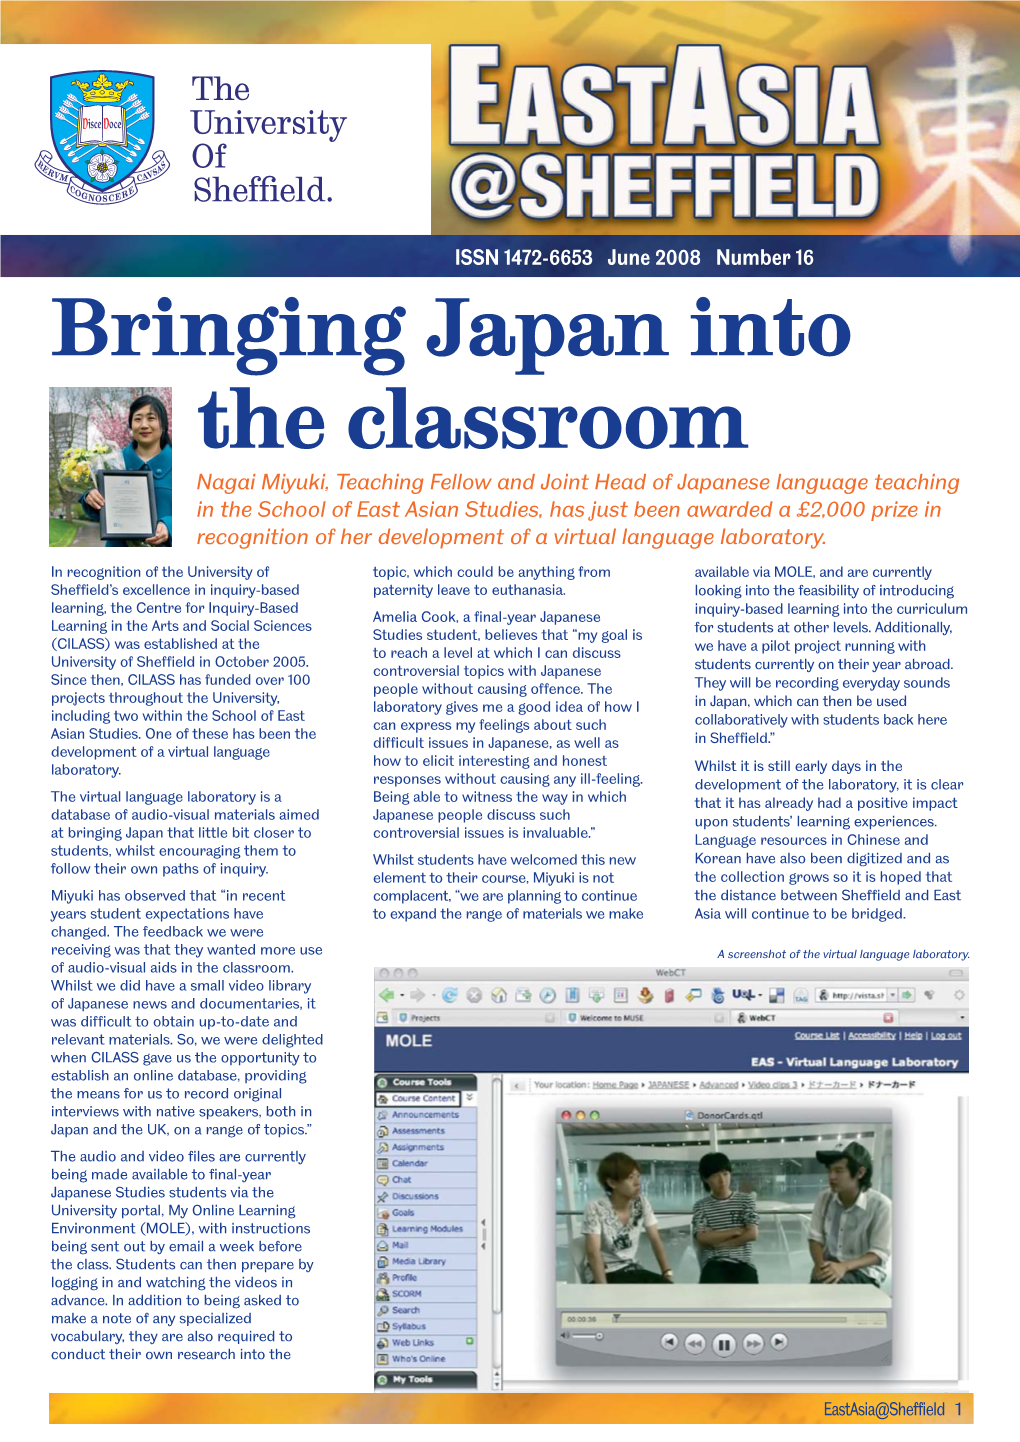 Bringing Japan Into the Classroom